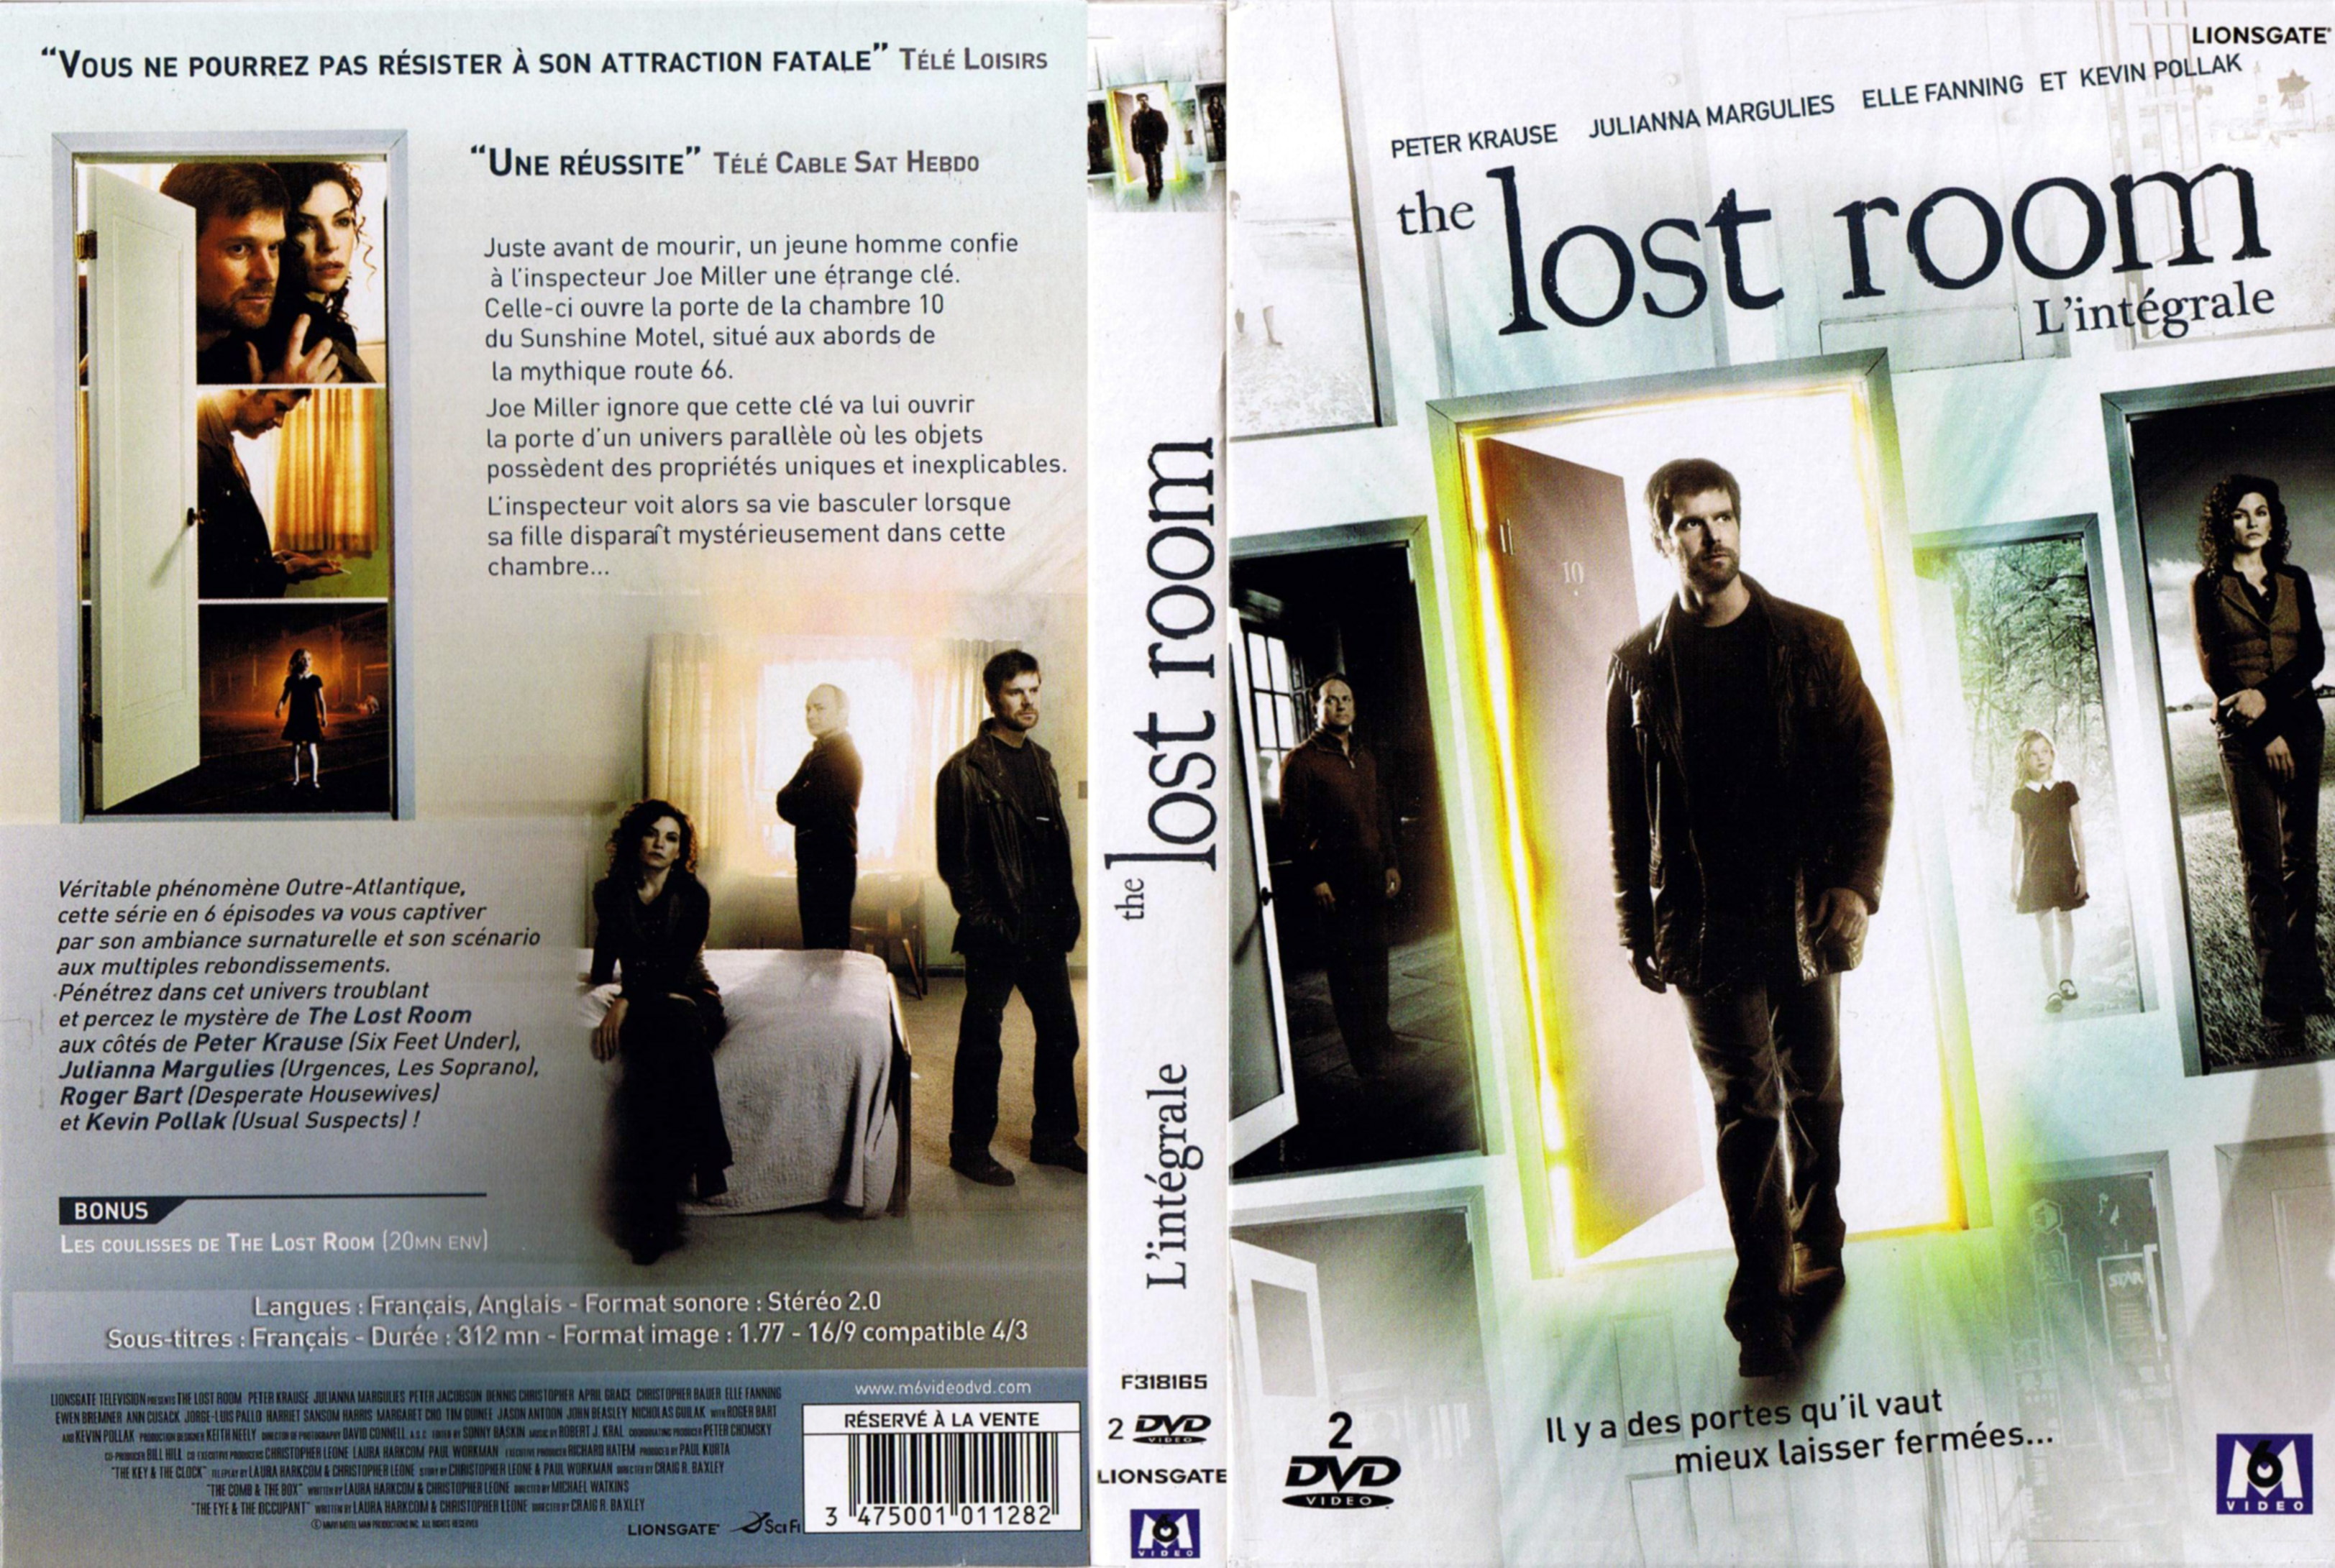 Jaquette DVD The lost room INTEGRALE